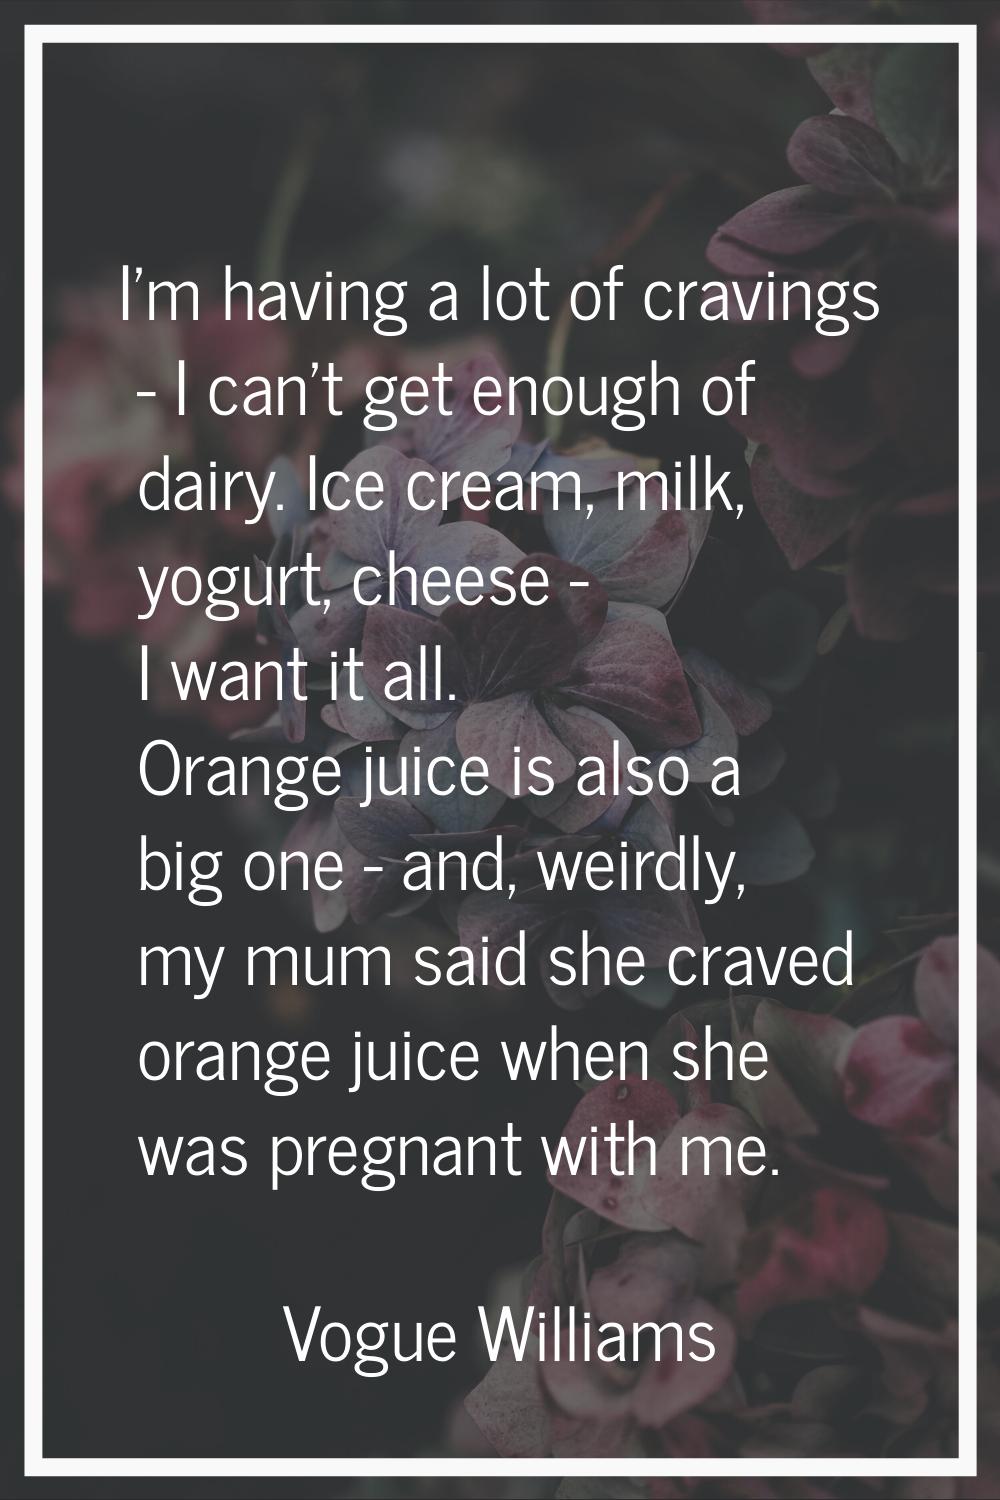 I'm having a lot of cravings - I can't get enough of dairy. Ice cream, milk, yogurt, cheese - I wan